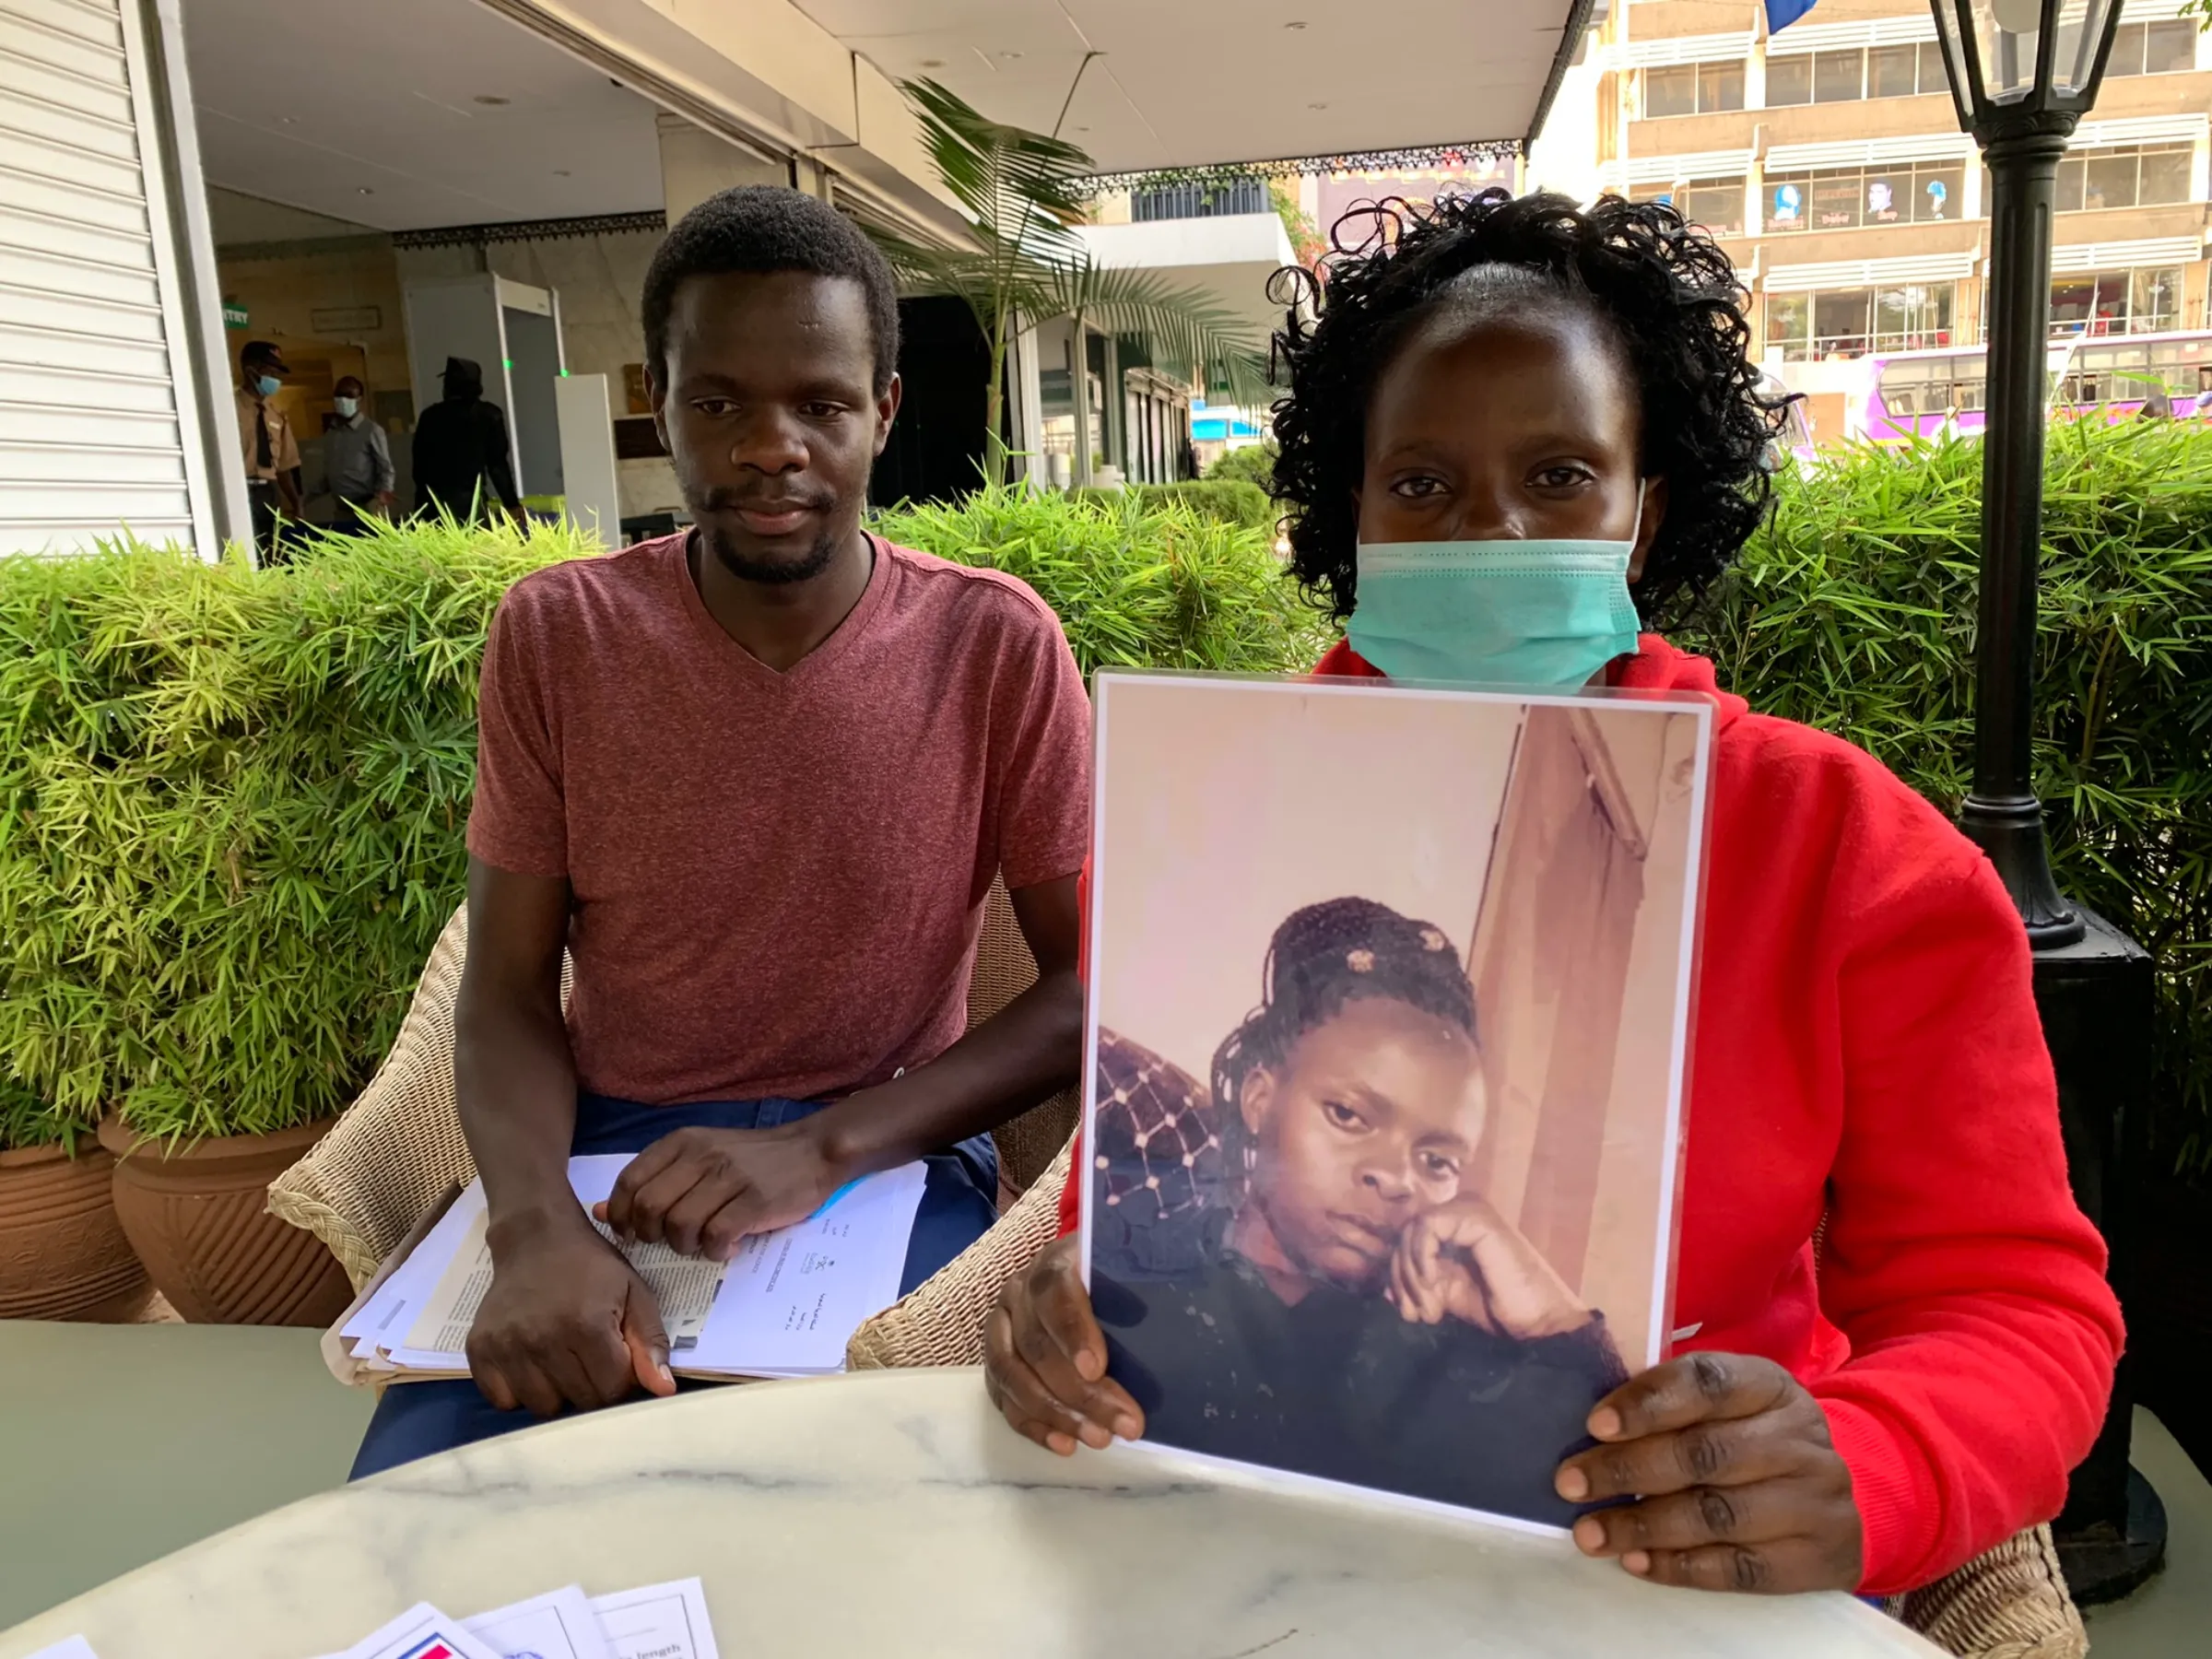 Beryl Aluoch and Stephen Aluoch pose with a picture of their sister Caroline Aluoch who died while working as a maid in Saudi Arabia